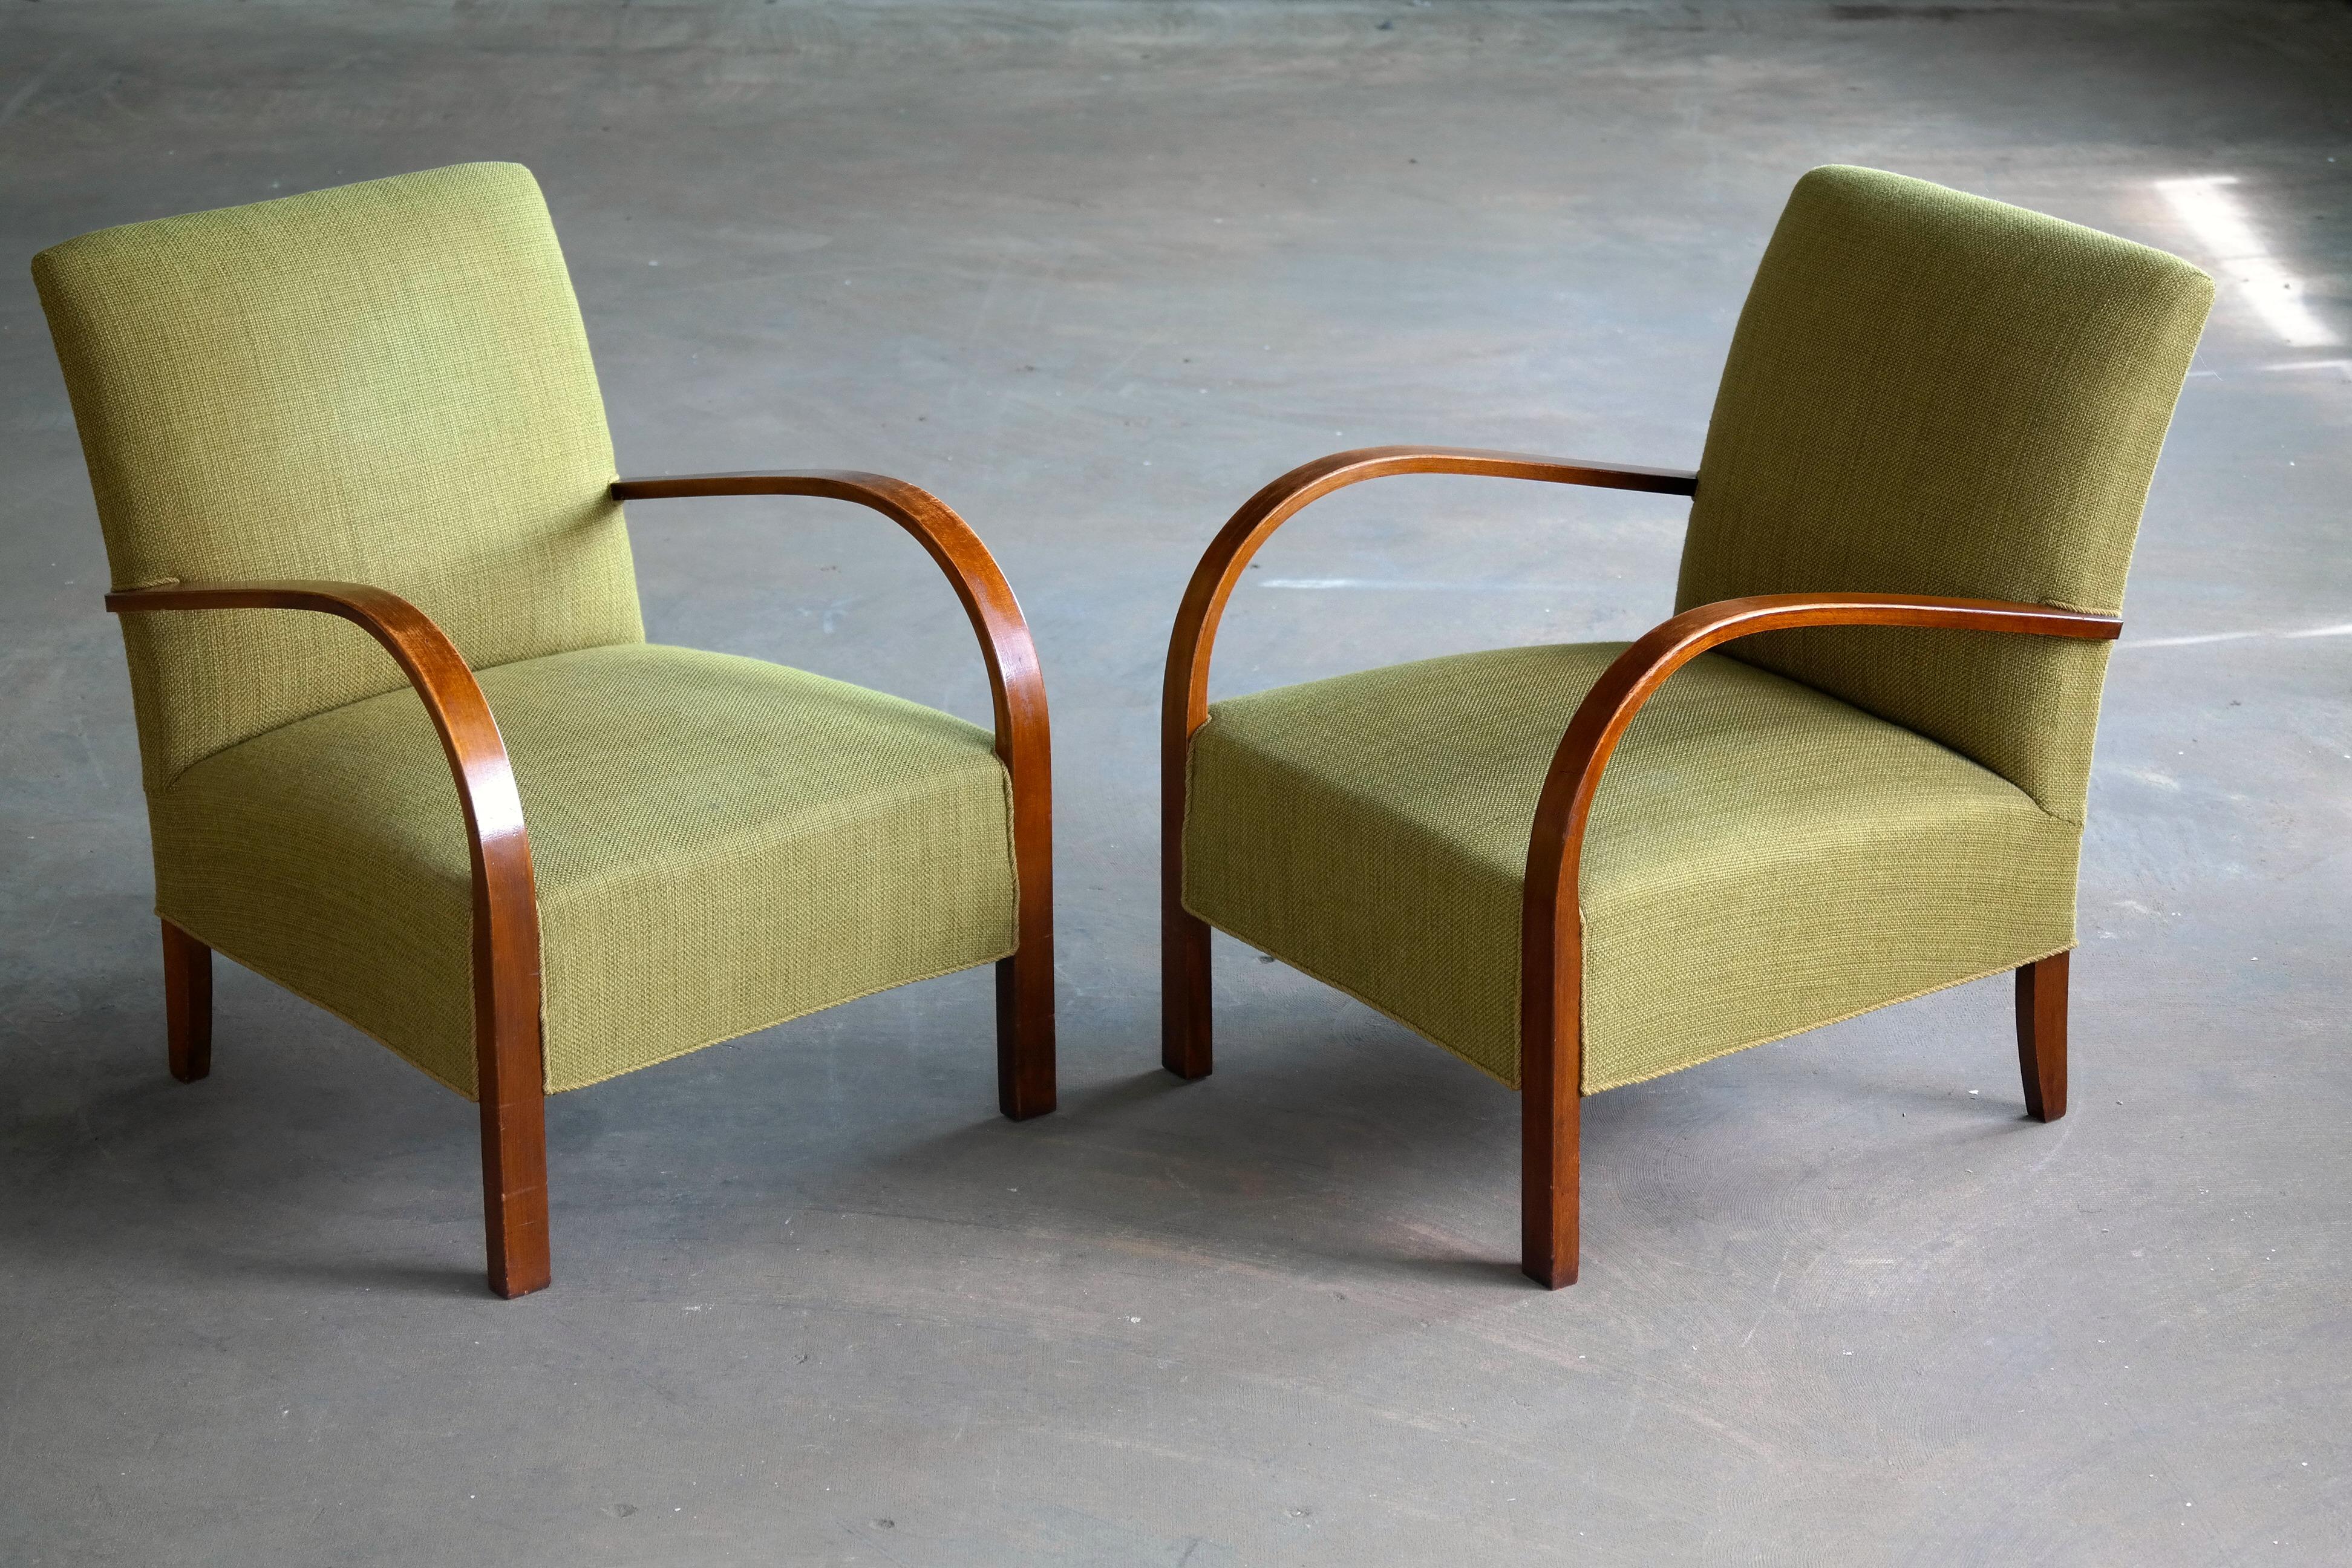 Superb pair of Danish late Art Deco early midcentury chairs from the early 1940s with spring cushions and solid beech wood armrests and legs. We just love the simple yet very refined elegant design of these chairs. Which will work very well in